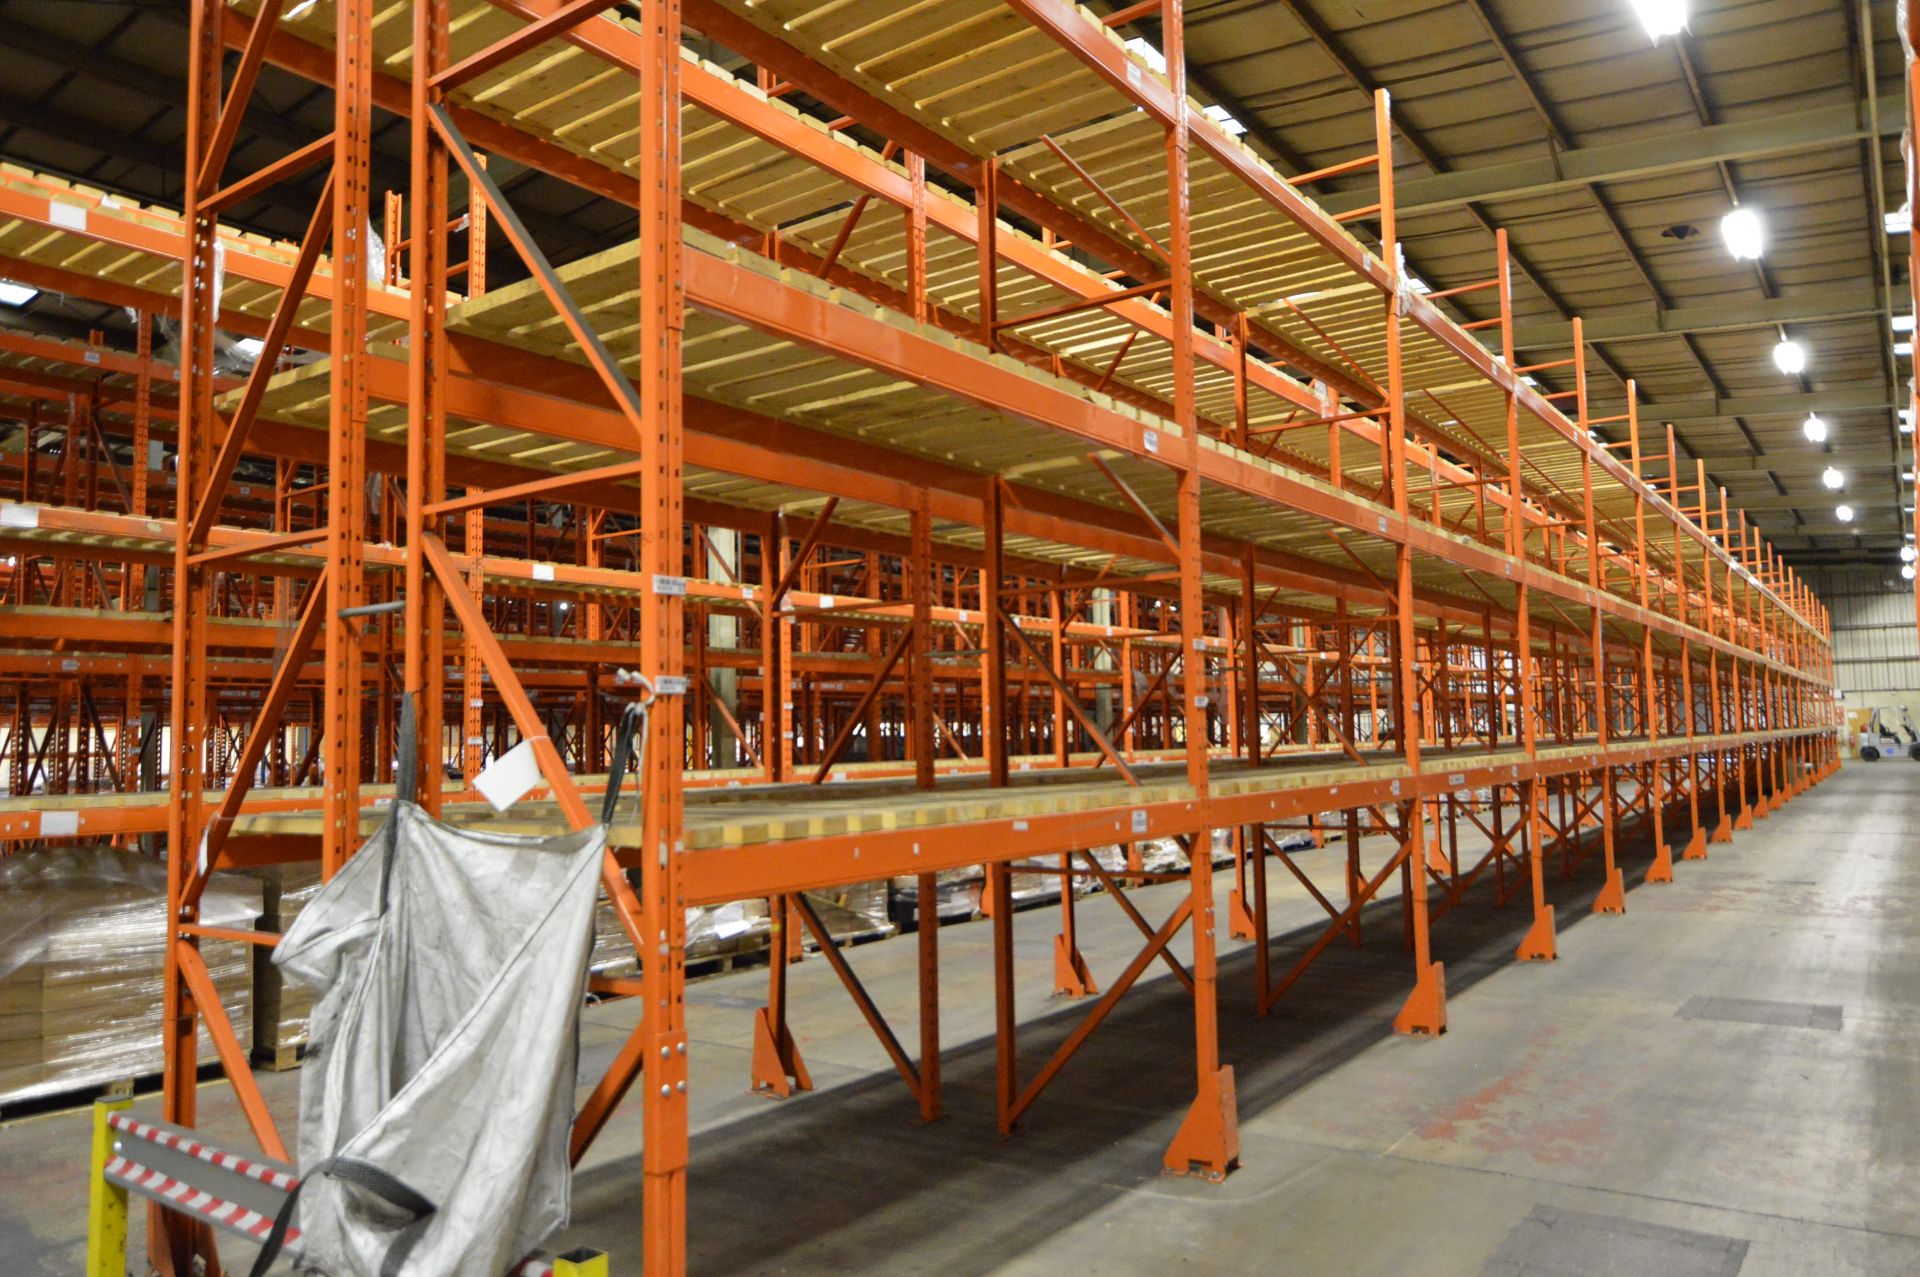 Redirack SD 2.50 DOUBLE SIDED 38 BAY THREE TIER PALLET RACK, each run approx. 52m x 1m x 5.4m - Image 2 of 4